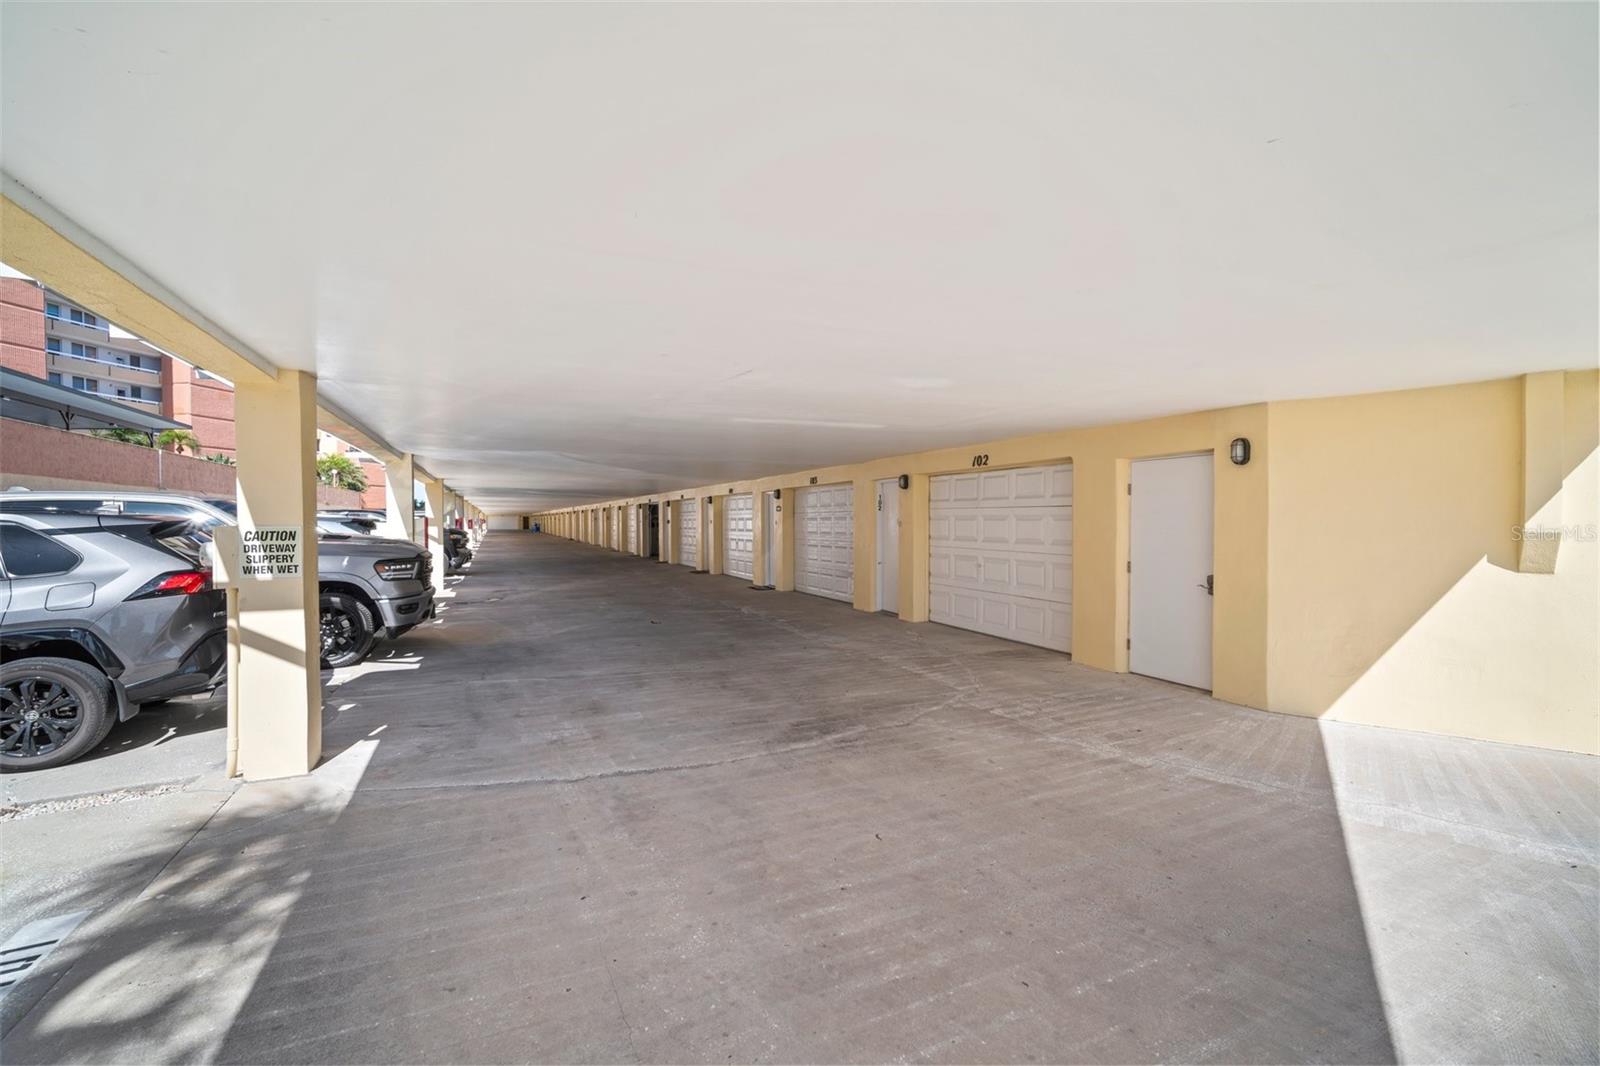 Two car garage with convenient assigned parking spot right next to 2 guest parking spots. Another fantastic benefit to this unit.